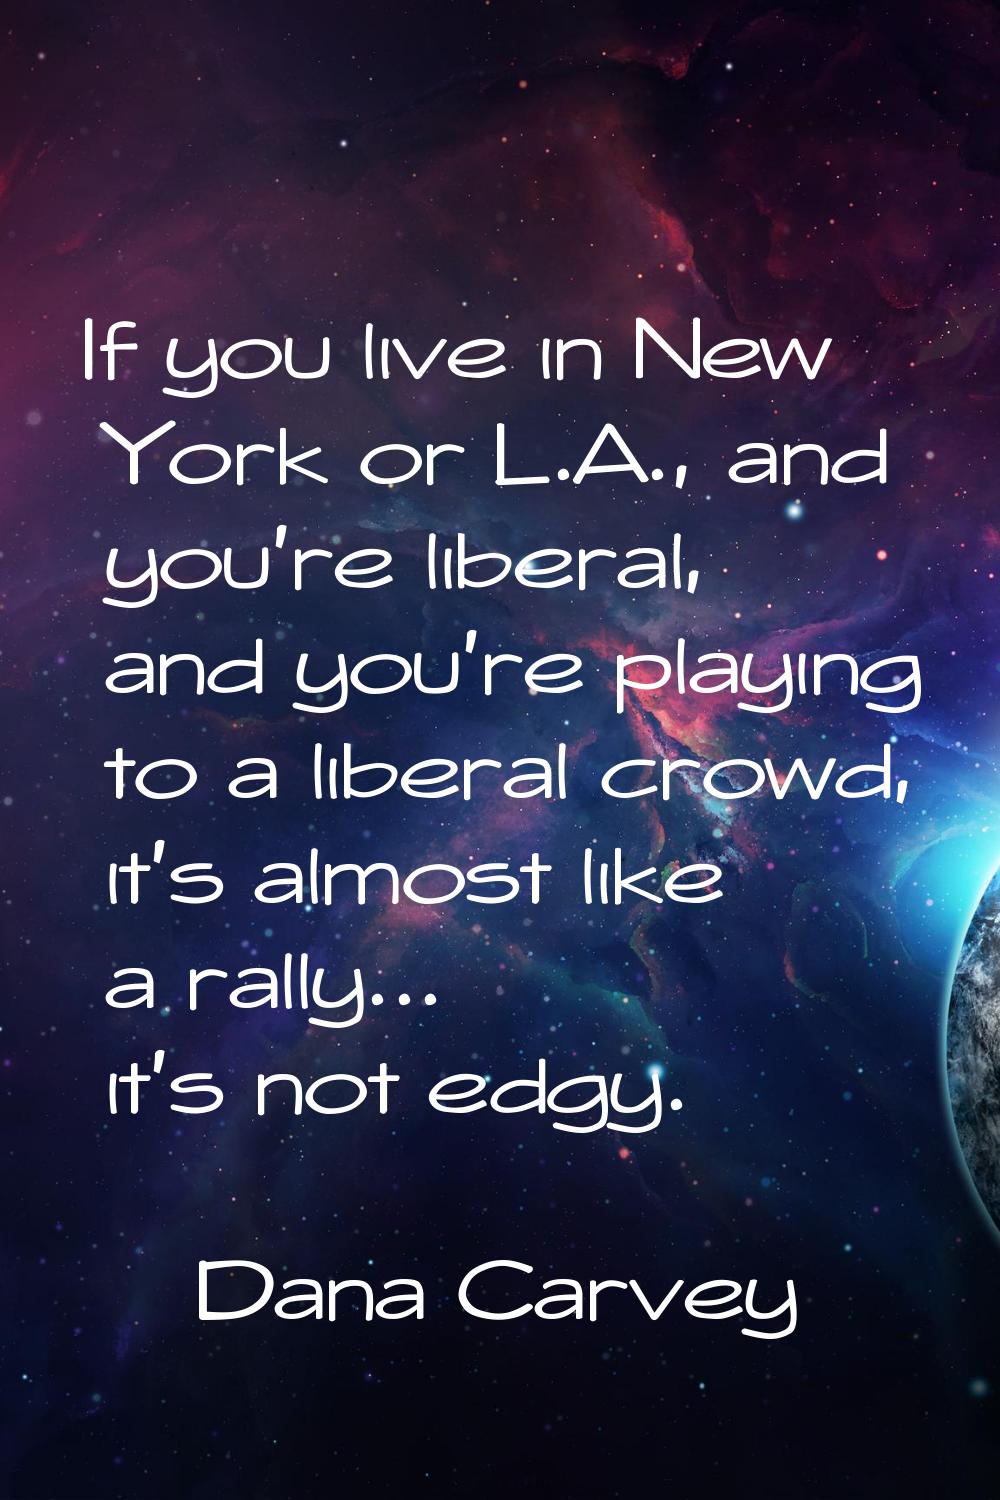 If you live in New York or L.A., and you're liberal, and you're playing to a liberal crowd, it's al